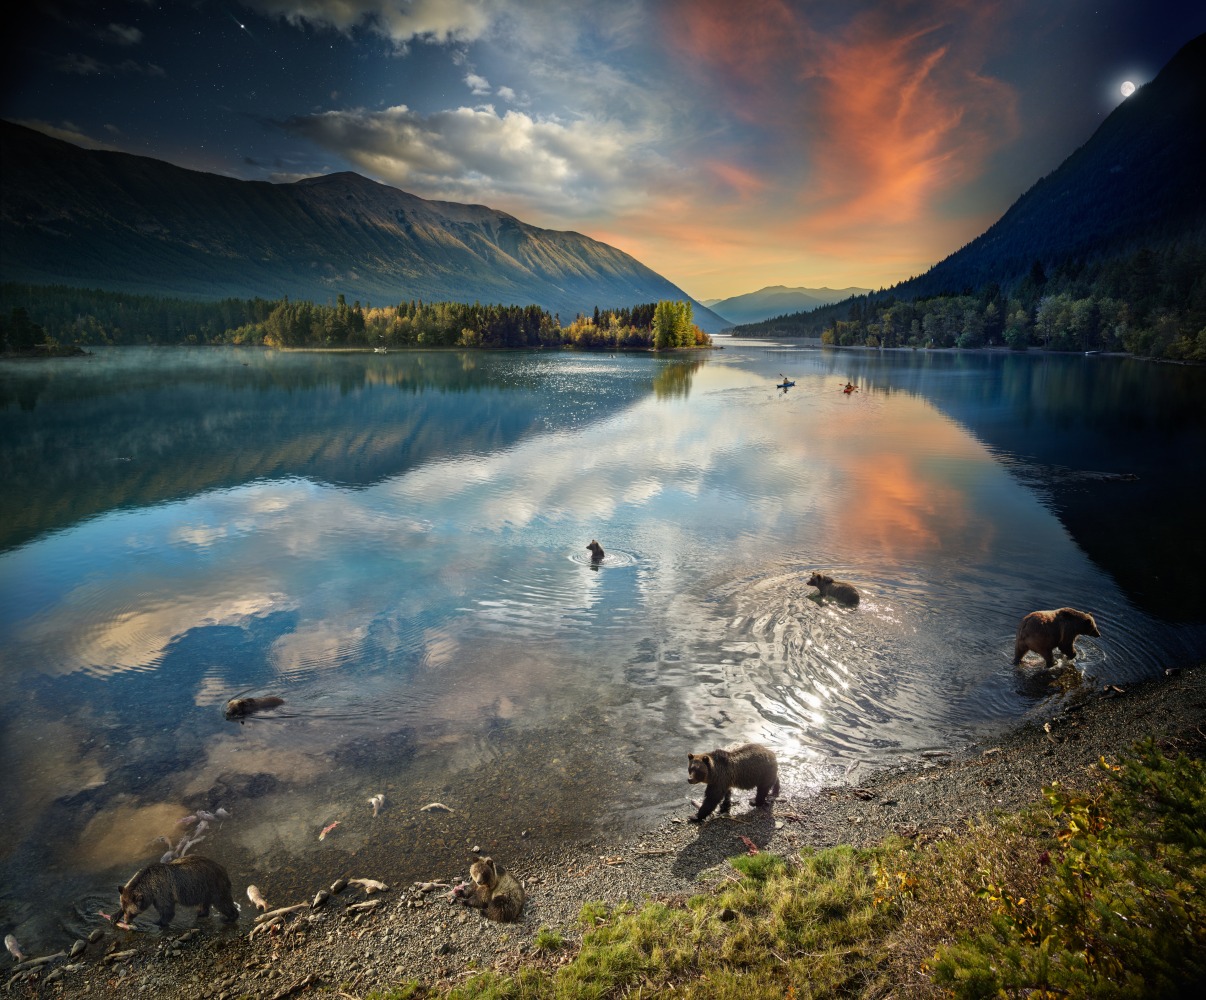 Stephen Wilkes, Grizzly Bears, Chilko Lake, B.C., Day to Night, 2022